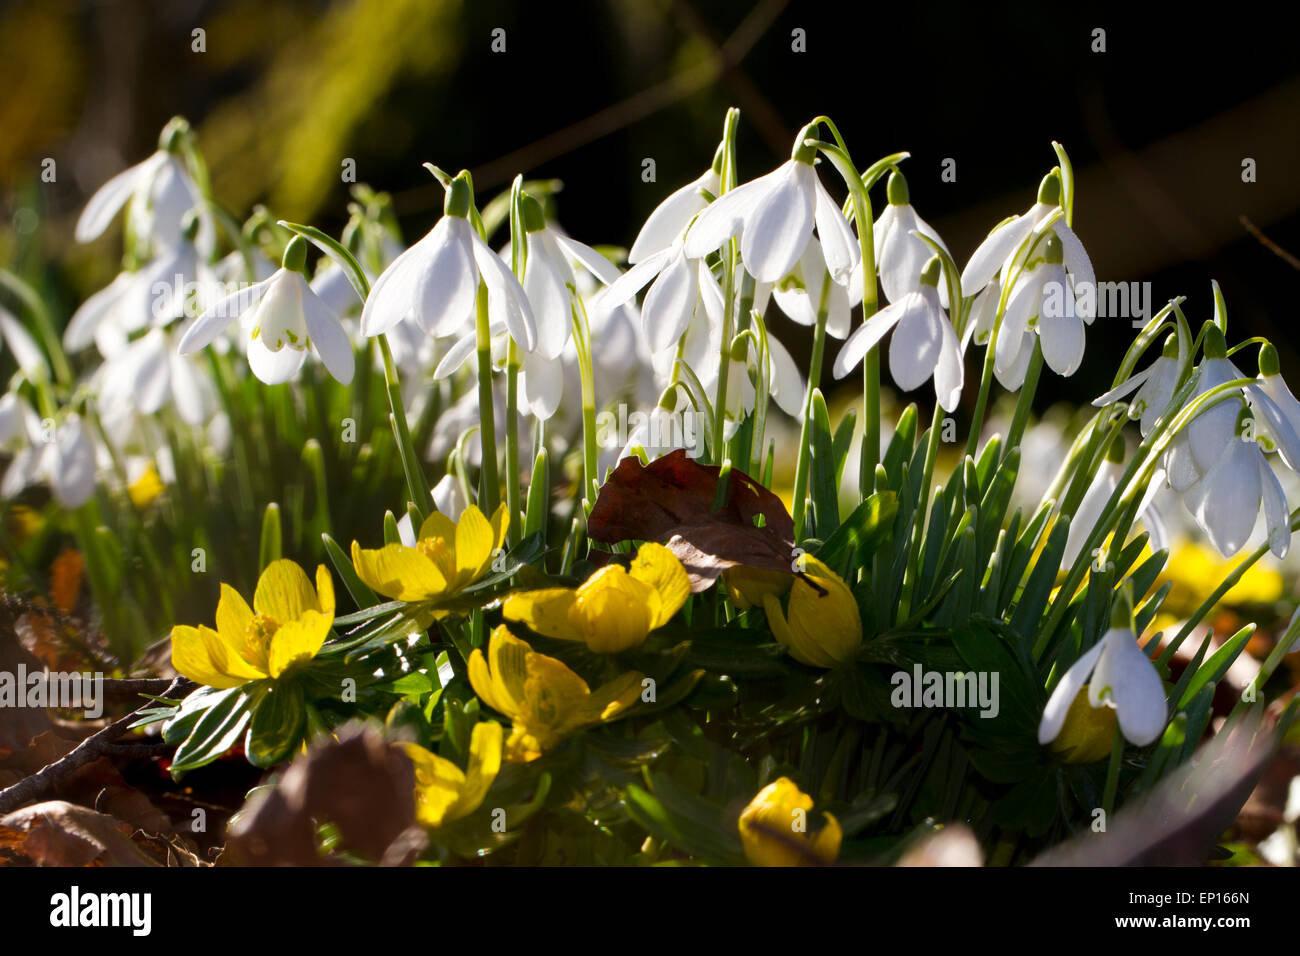 Snowdrops (Galanthus nivalis) and Winter Aconites (Eranthis Cilicica) flowering in a woodland garden. Carmarthenshire, Wales. Stock Photo